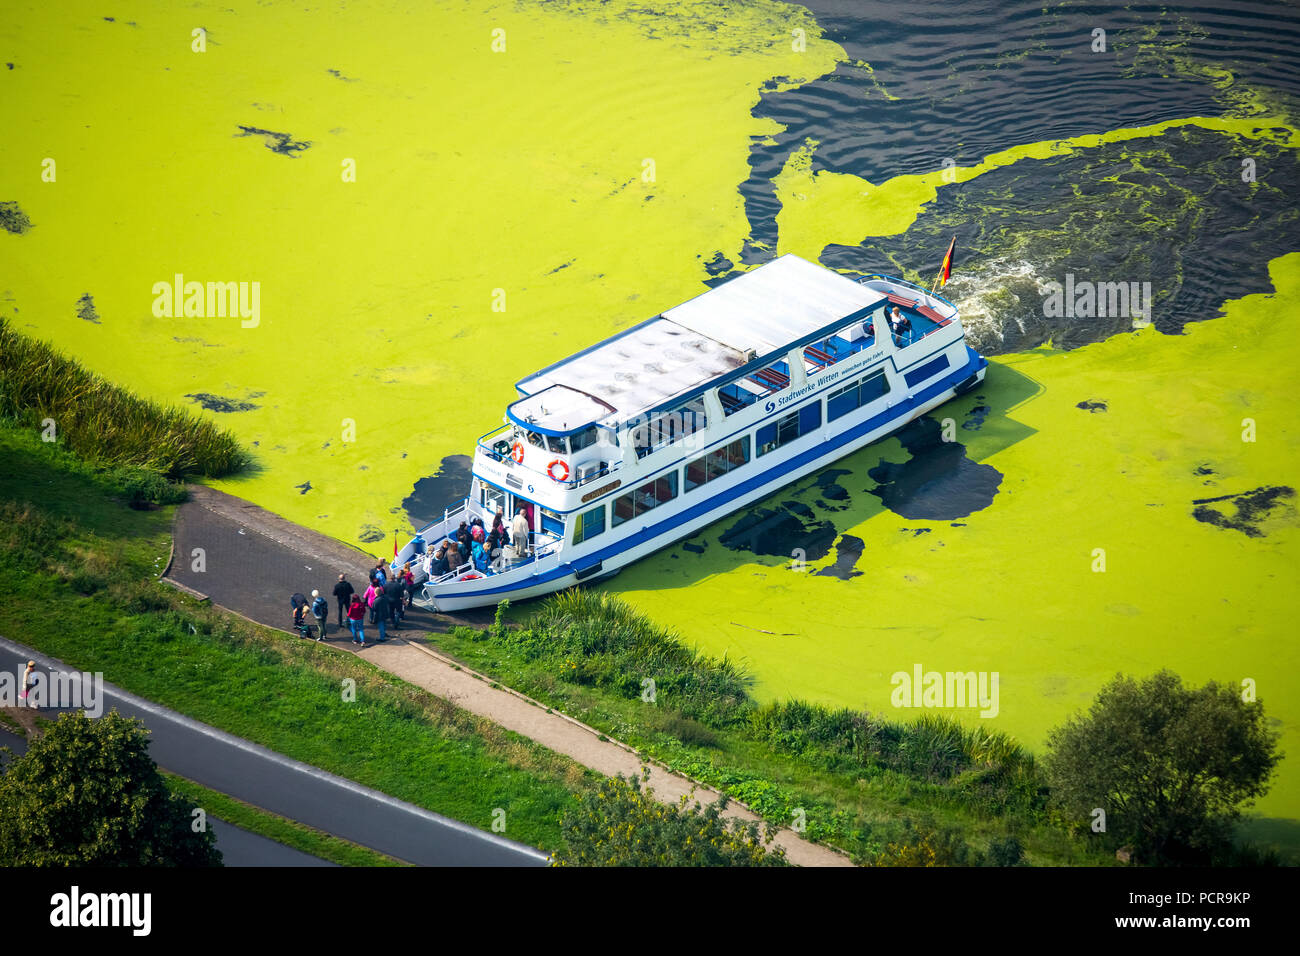 Waterweed, Elodea, the passenger ship Schwalbe II on the Witten side in Heveney at the Kemnader reservoir picking up passengers, Bochum, Ruhr area, North Rhine-Westphalia, Germany Stock Photo